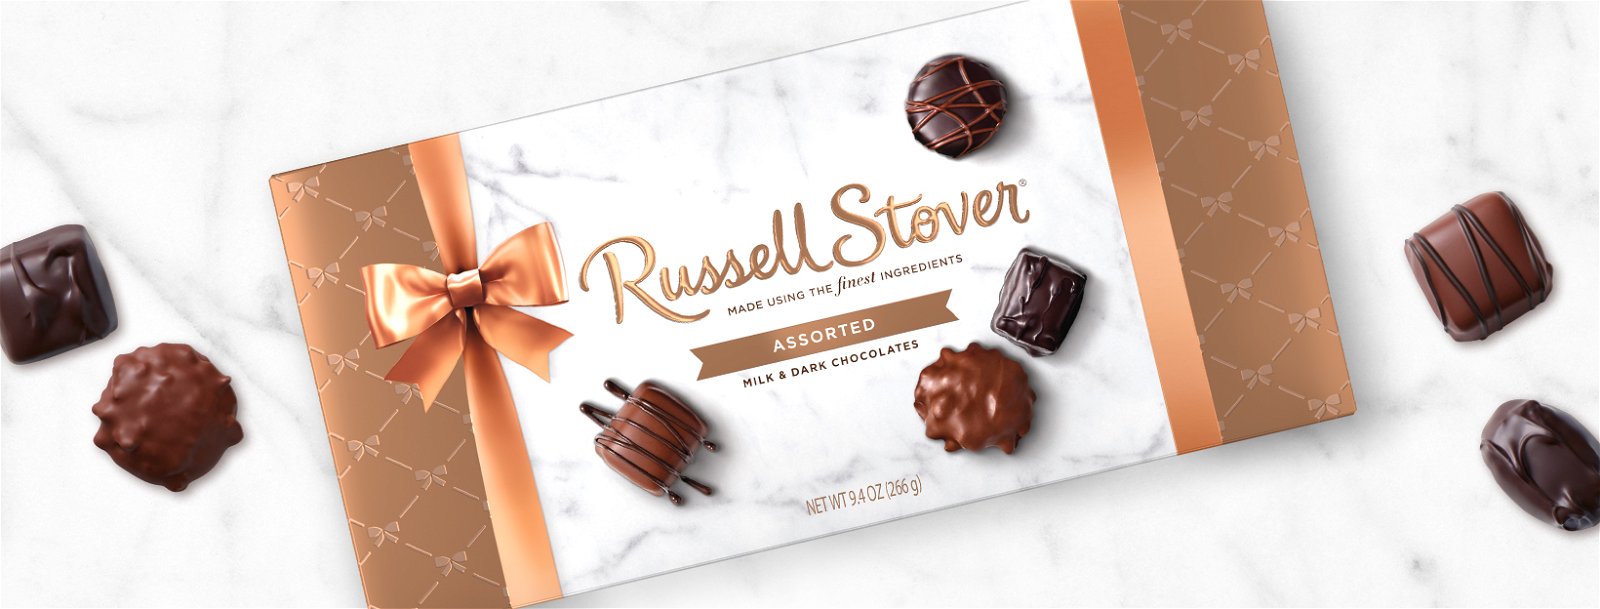 Russell stover chocolates